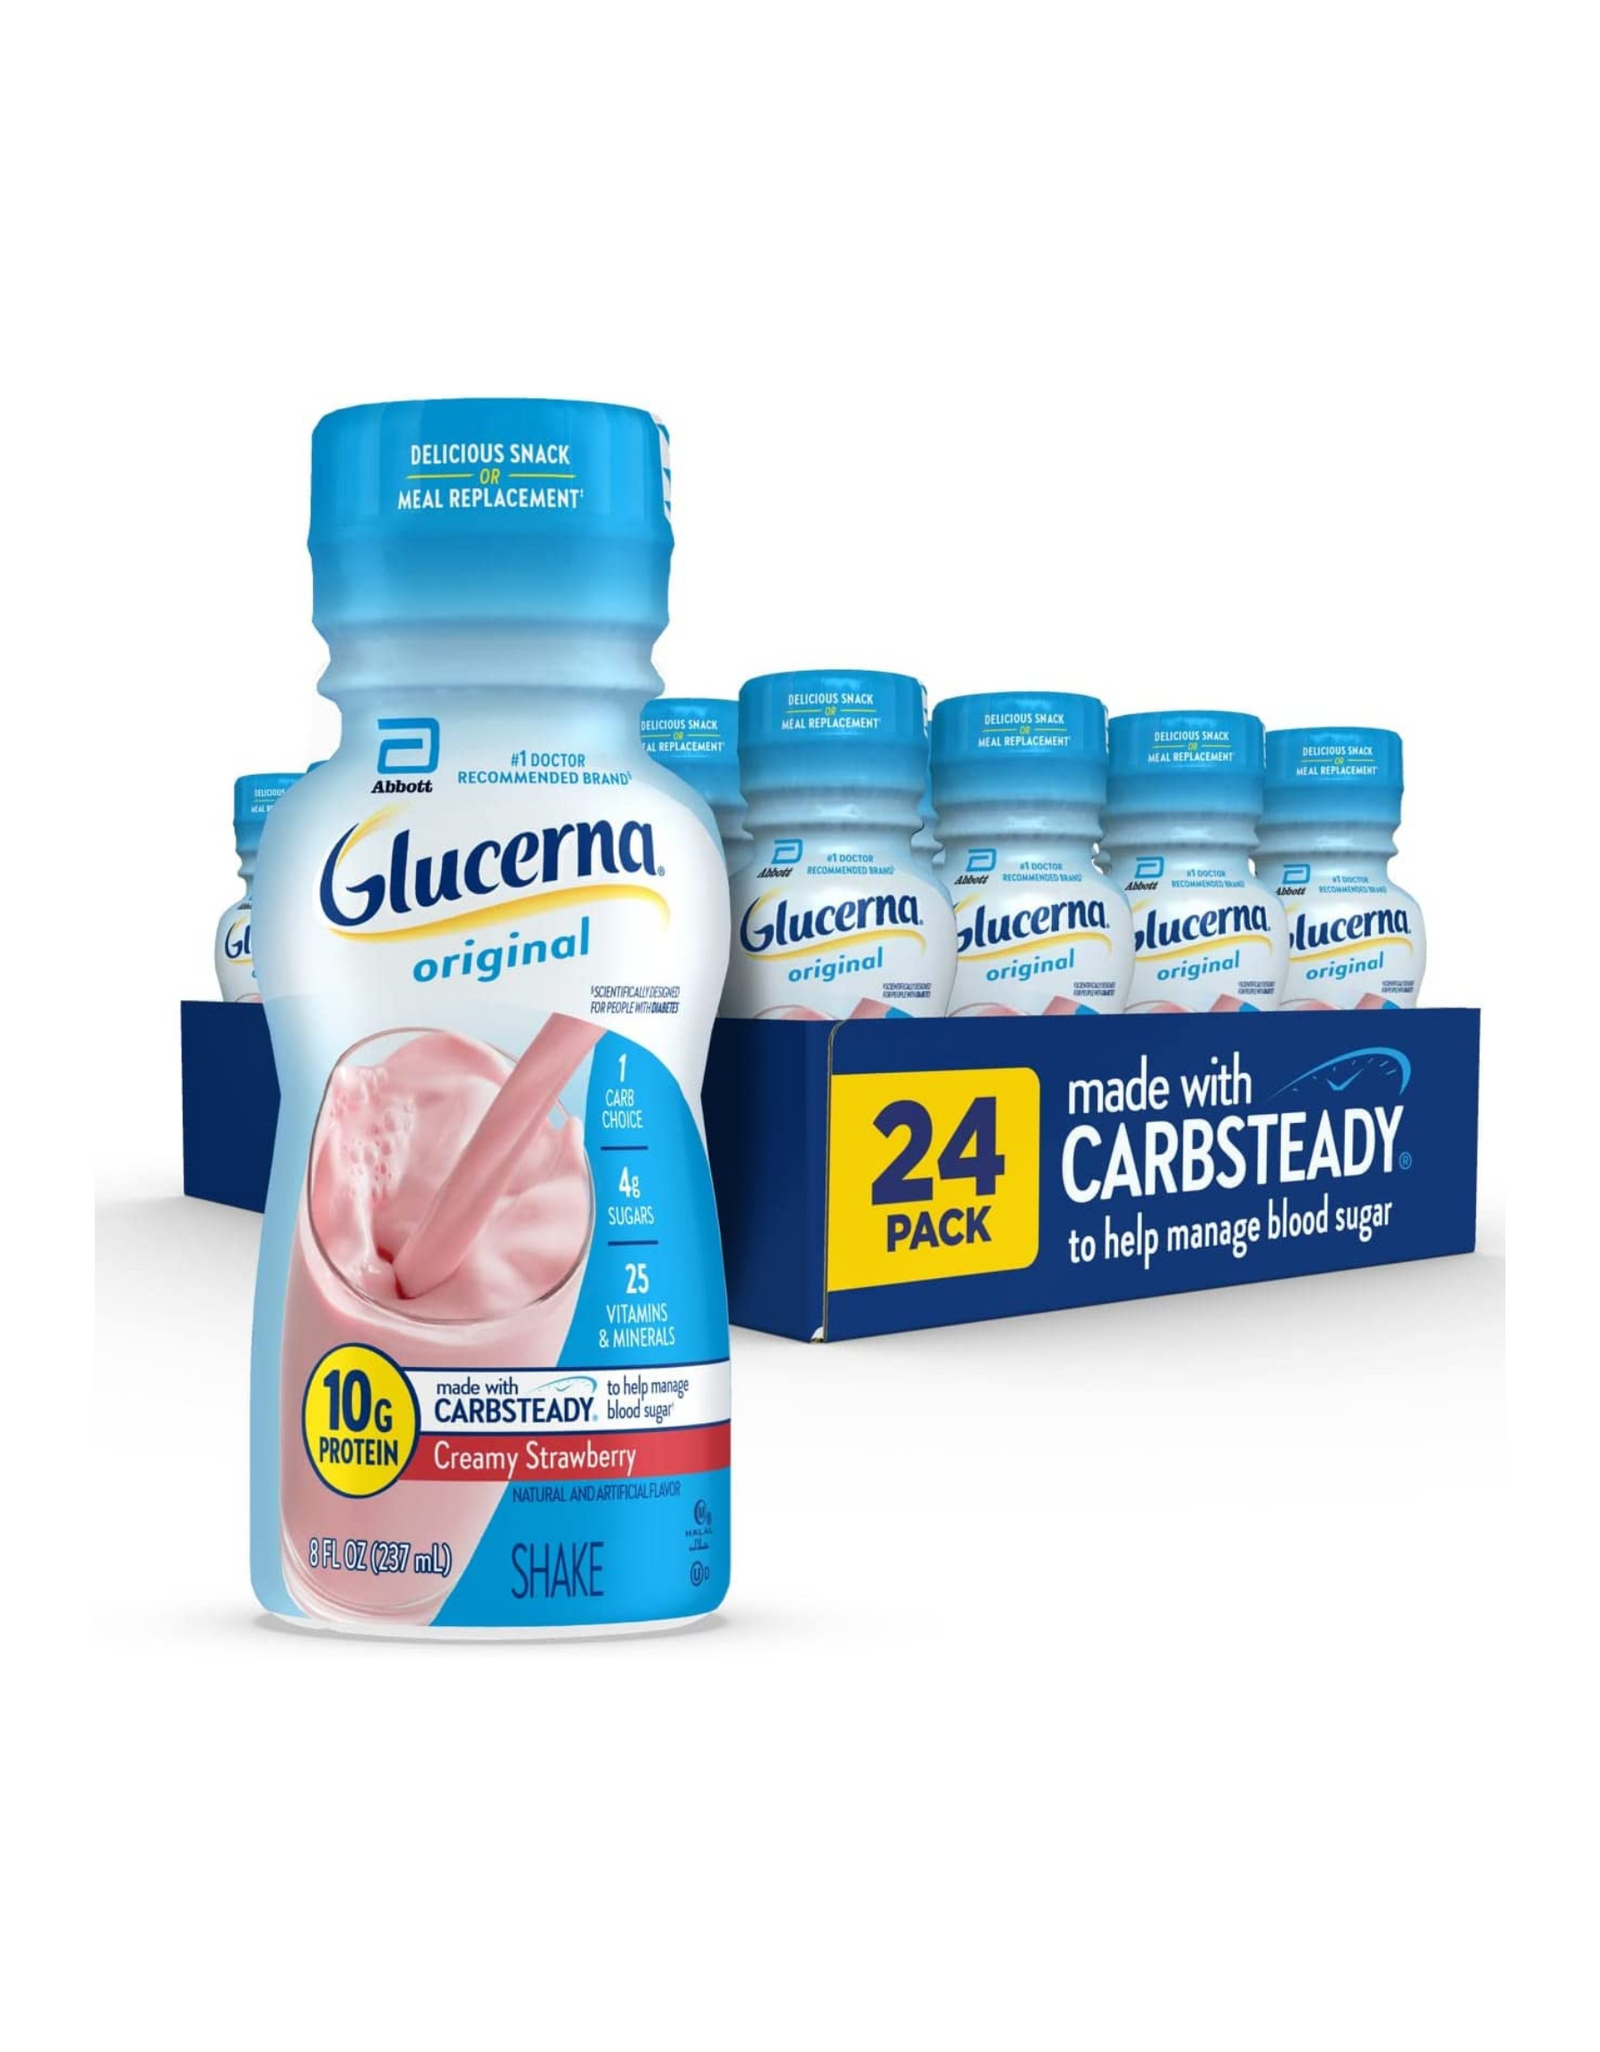 Glucerna Nutritional Shake, Made With Carbsteady for Blood Sugar Management, Creamy Strawberry, 8 fl oz, 24 Ct